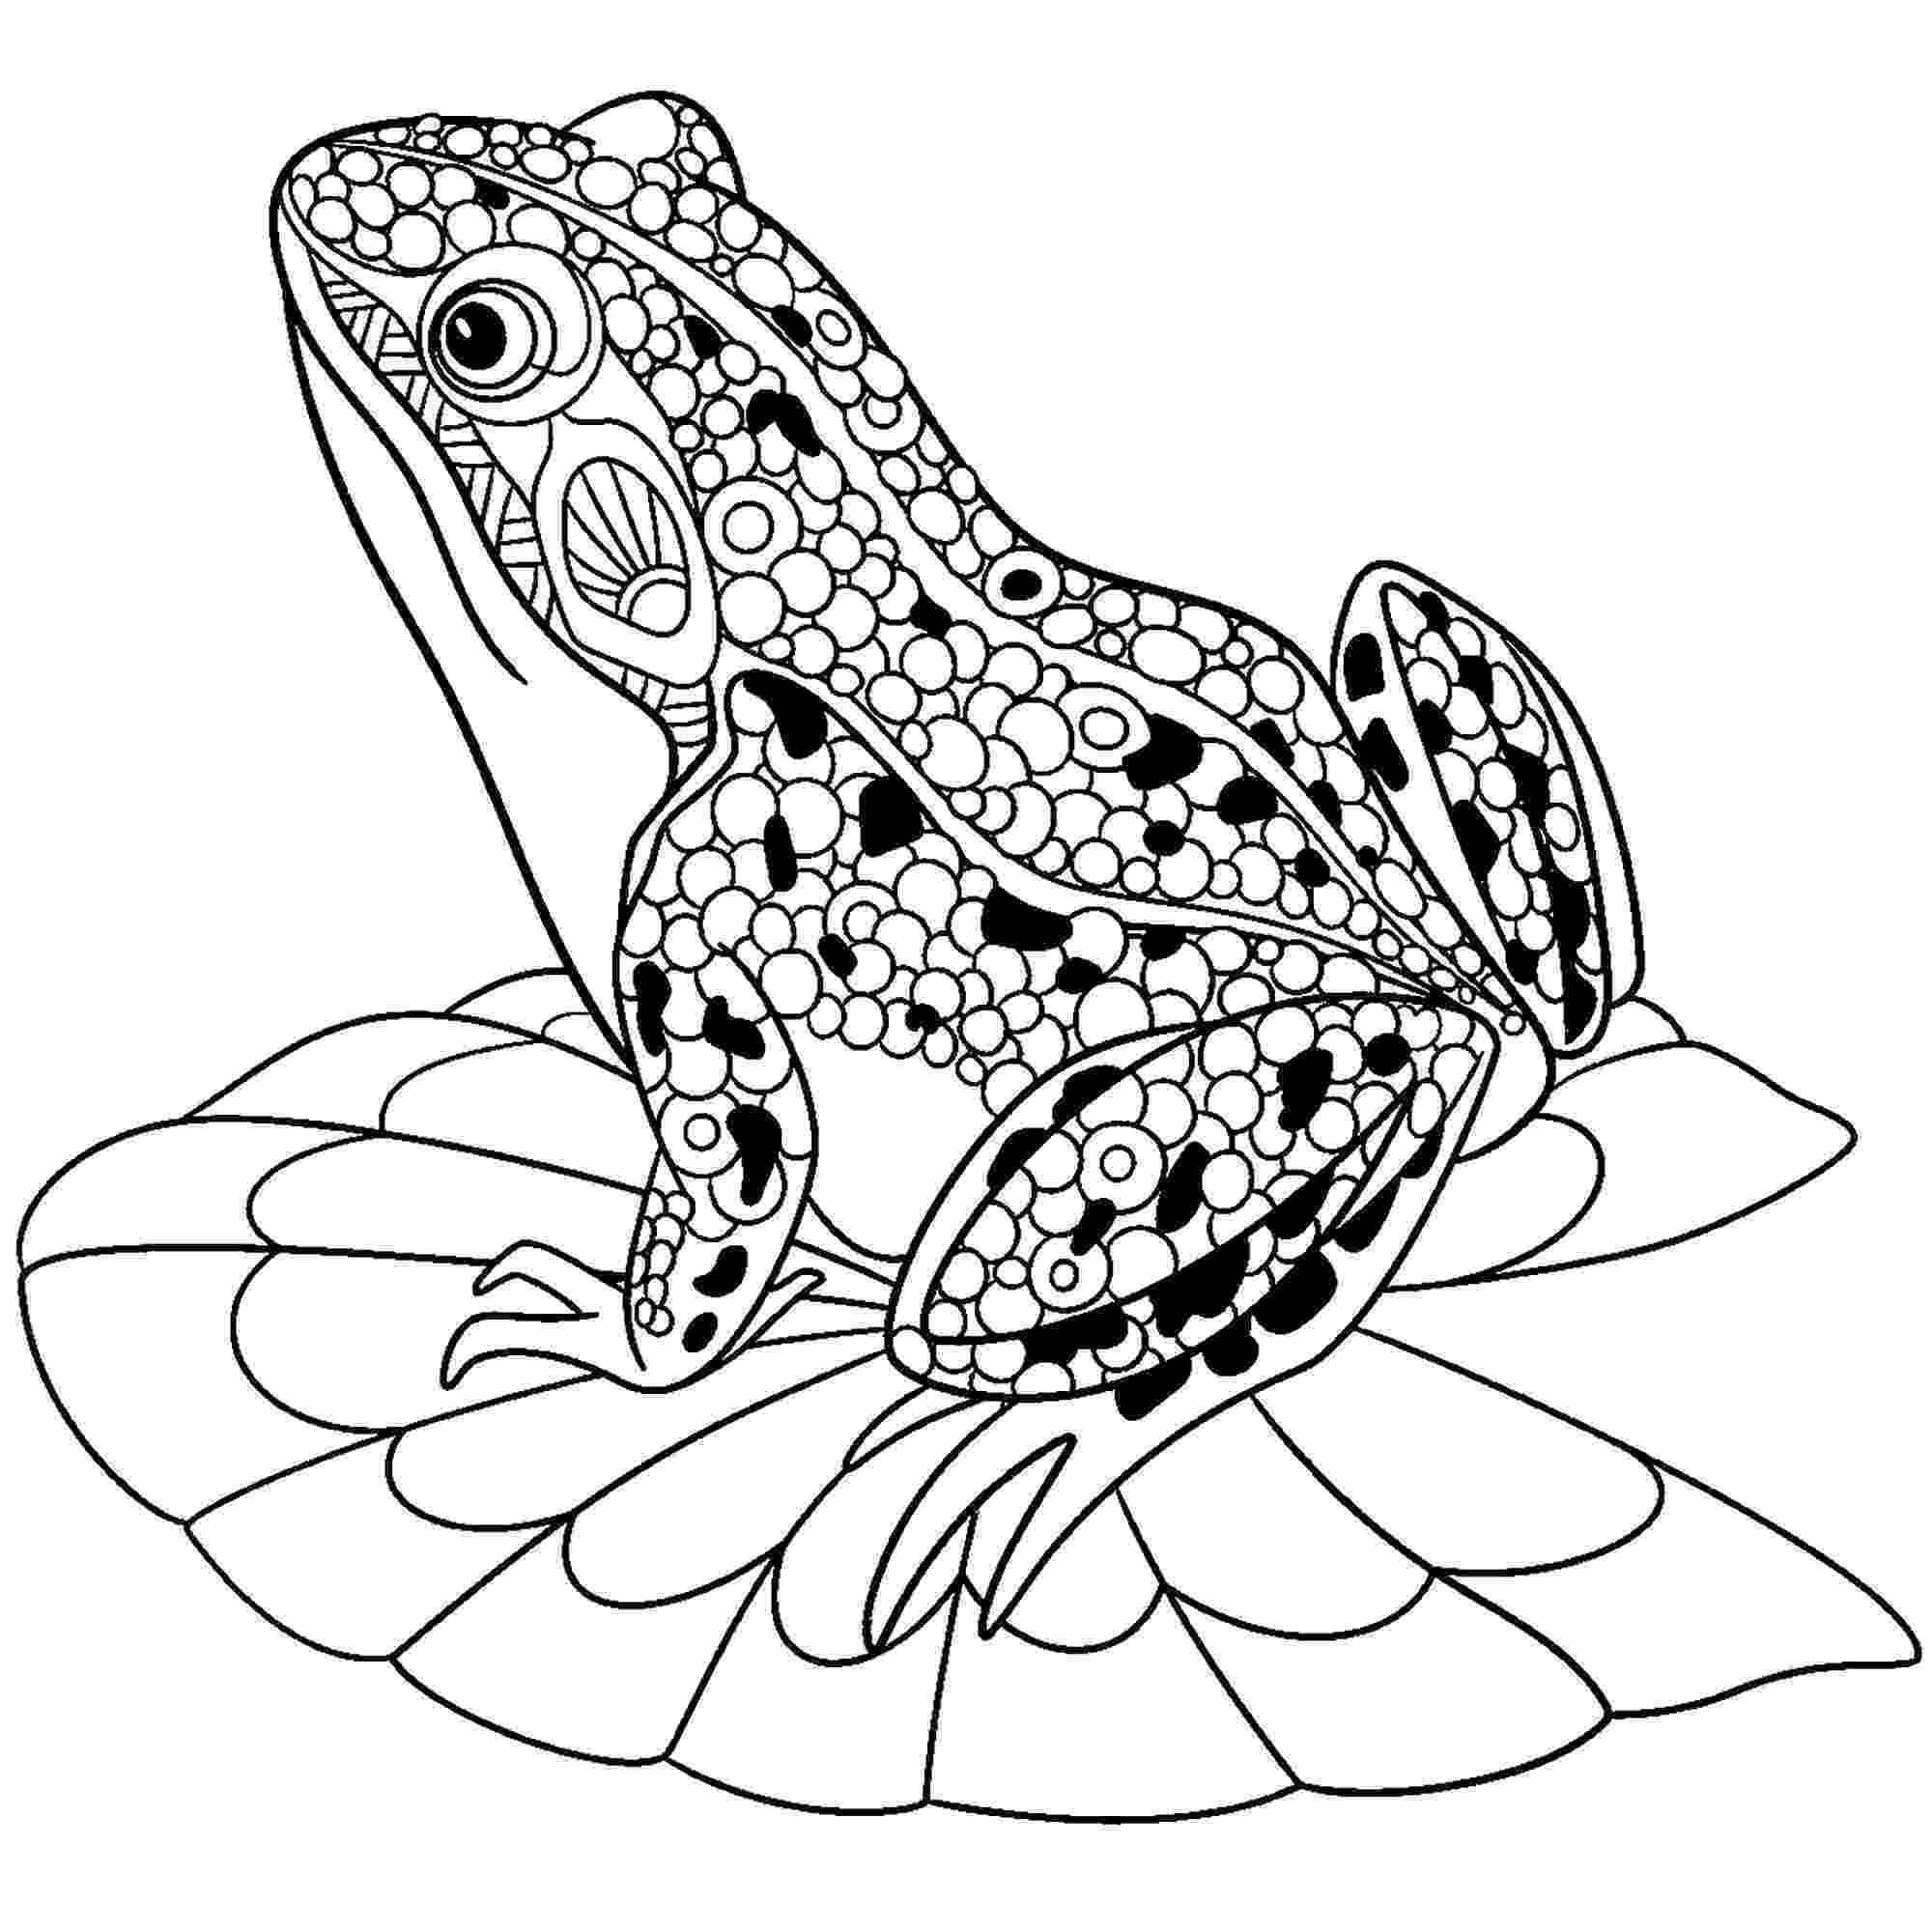 amphibian coloring pages frogs free to color for children frogs kids coloring pages coloring pages amphibian 